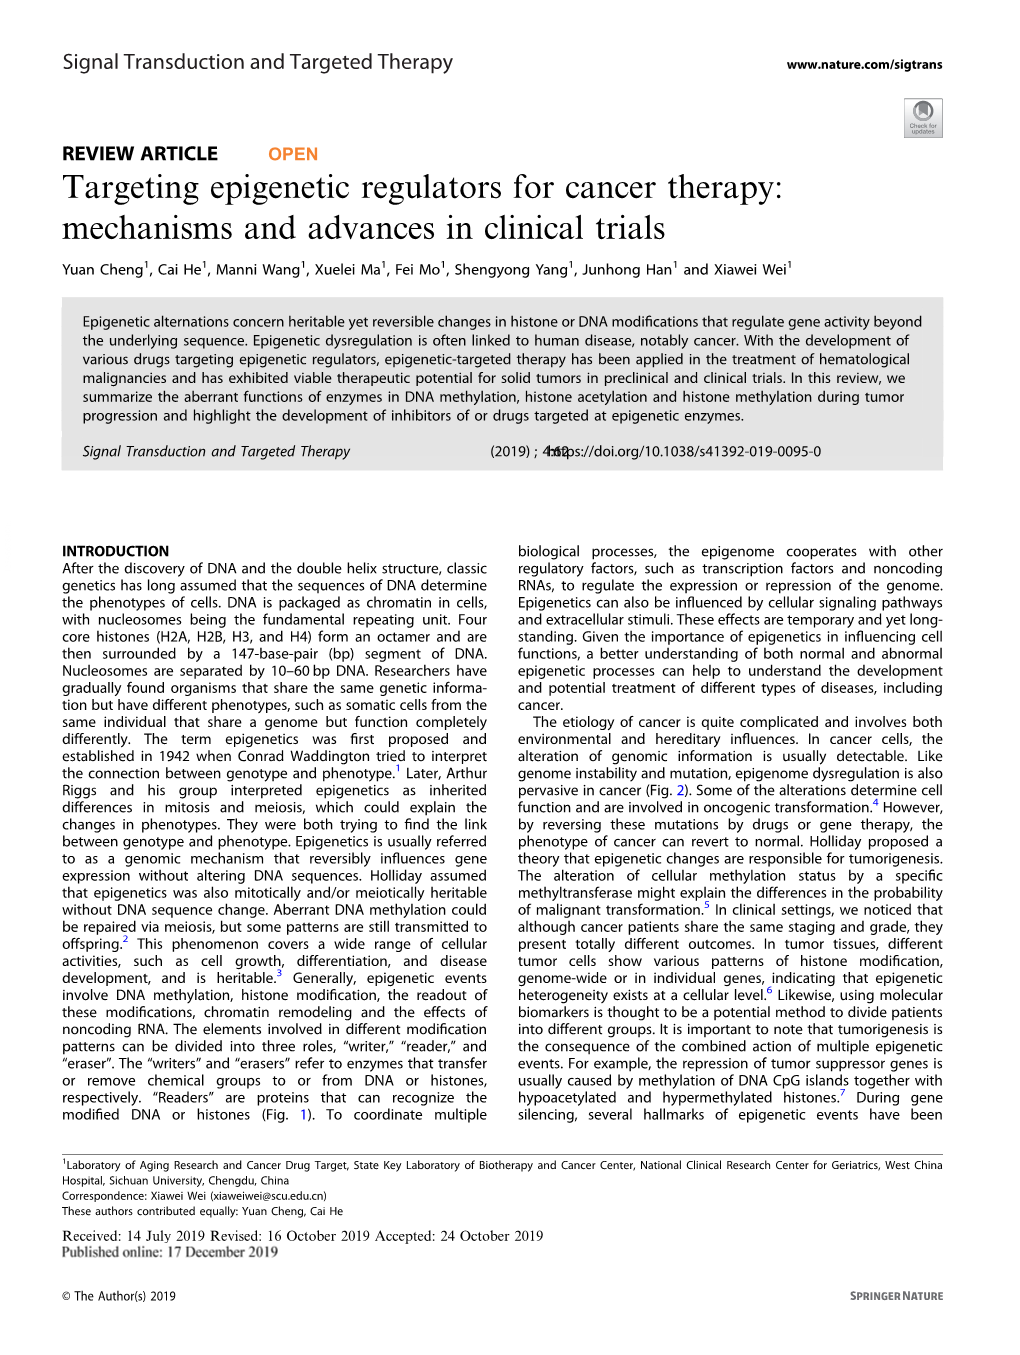 Targeting Epigenetic Regulators for Cancer Therapy: Mechanisms and Advances in Clinical Trials